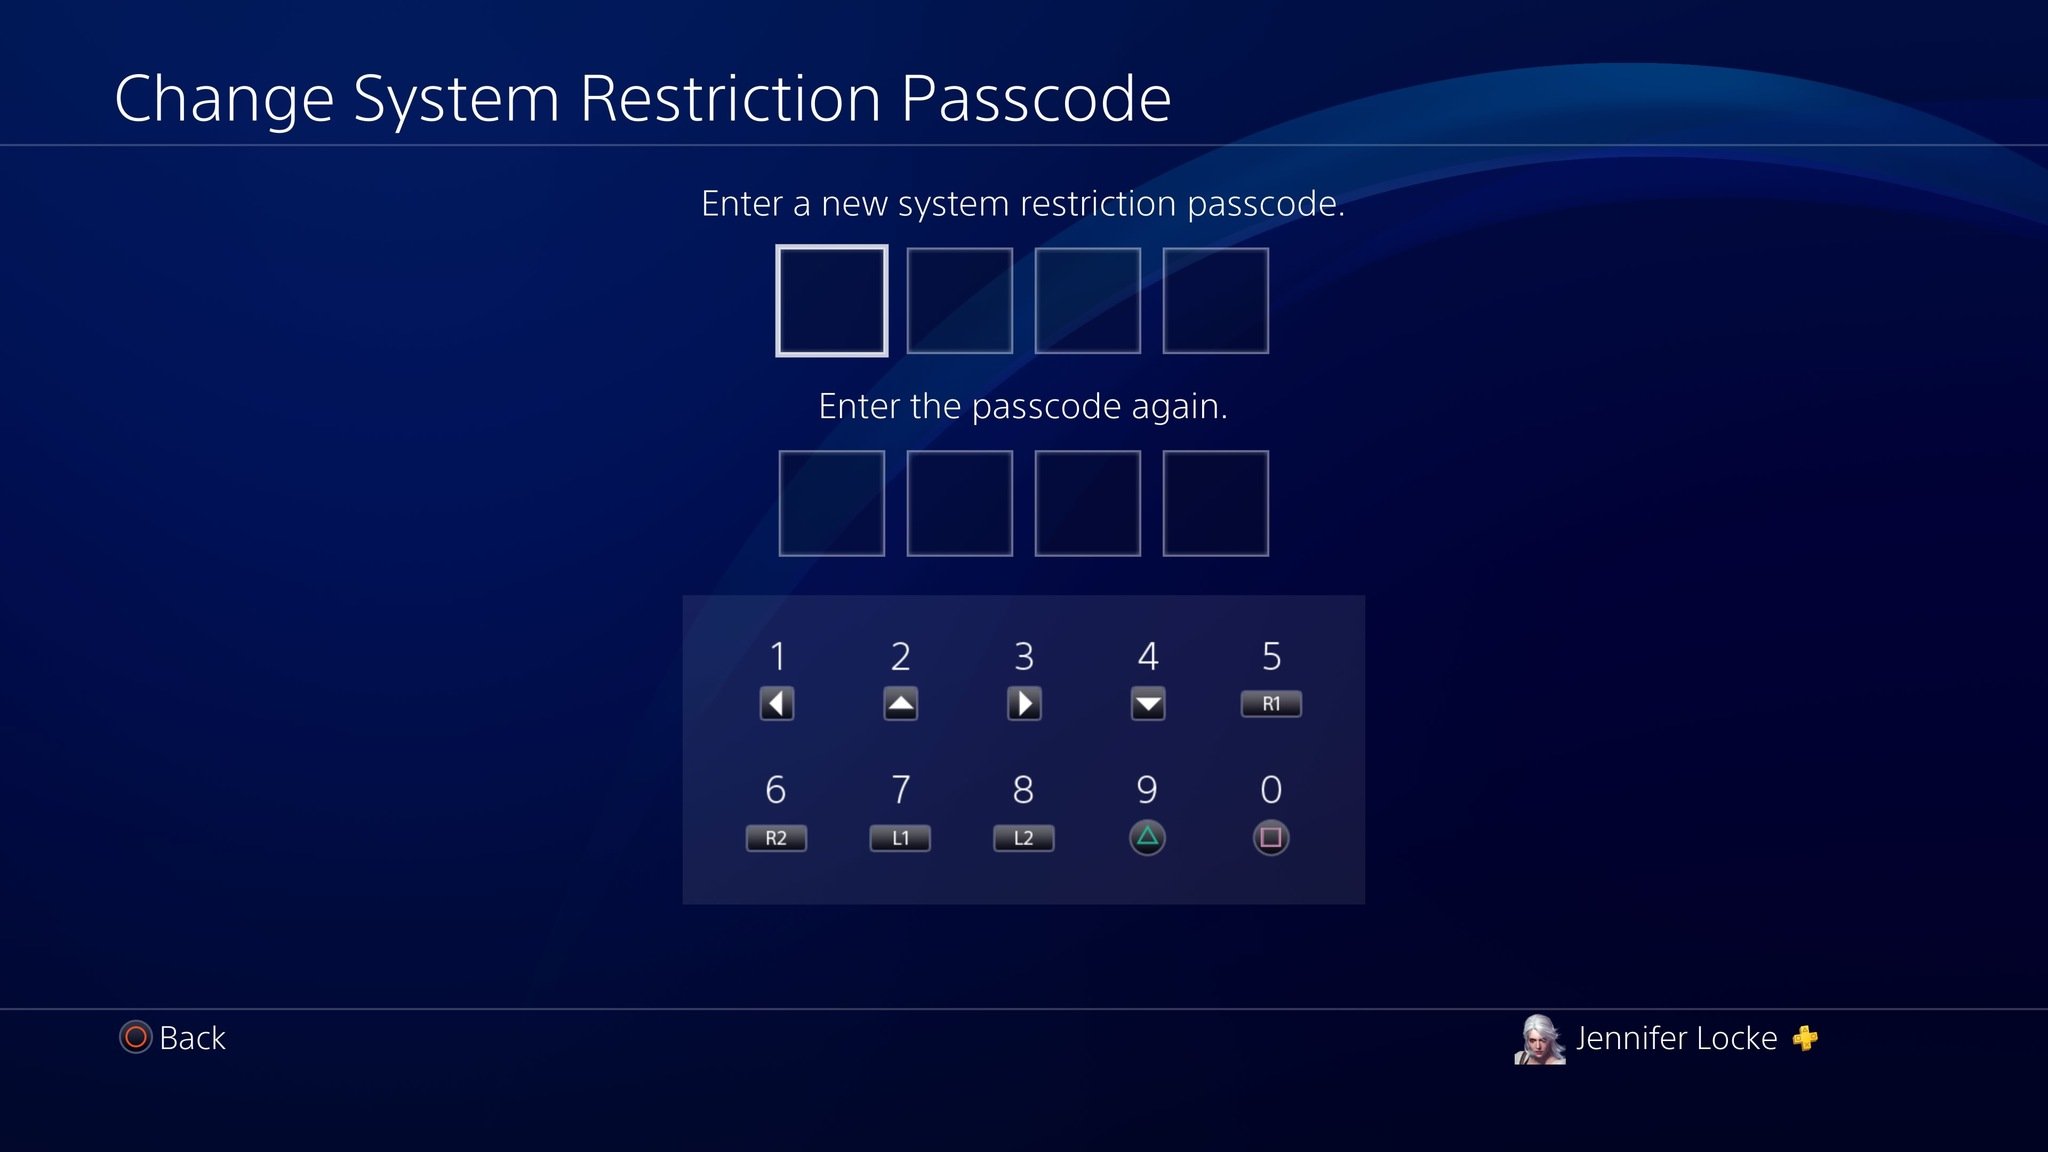 New System Restriction Passcode